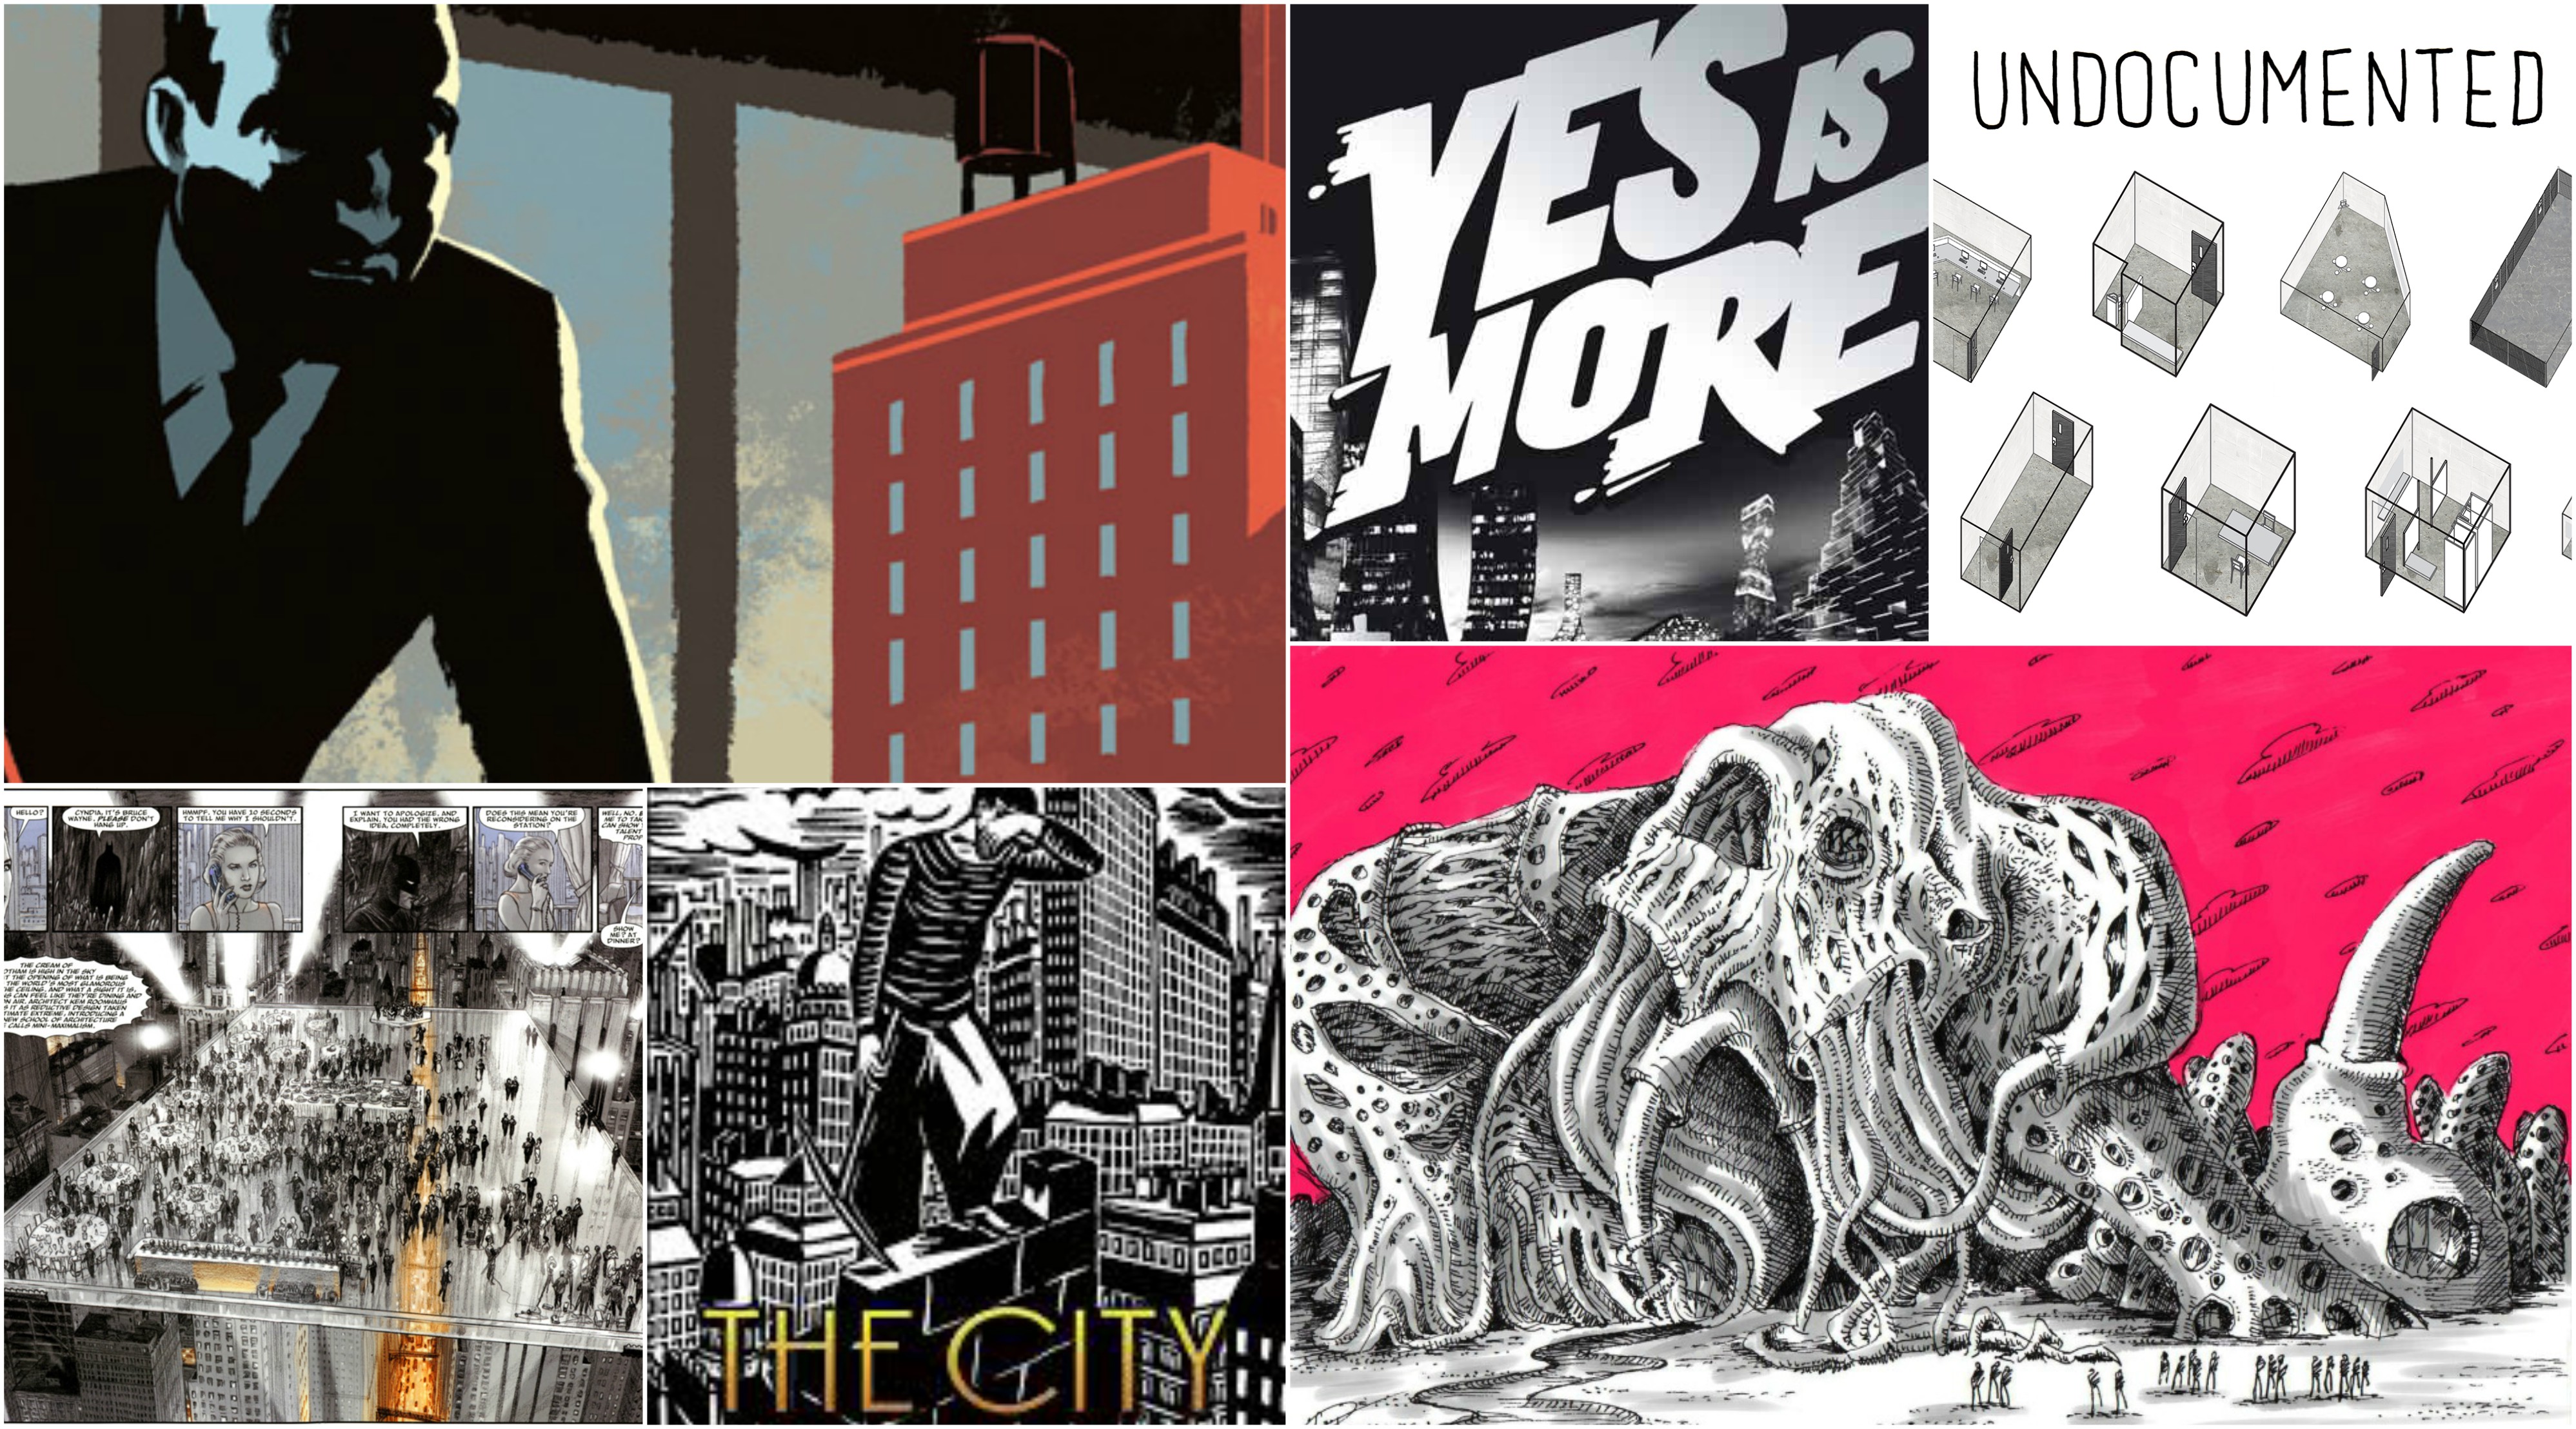 Image Depicts The Must-Read Graphic Novels In The Form A Collage